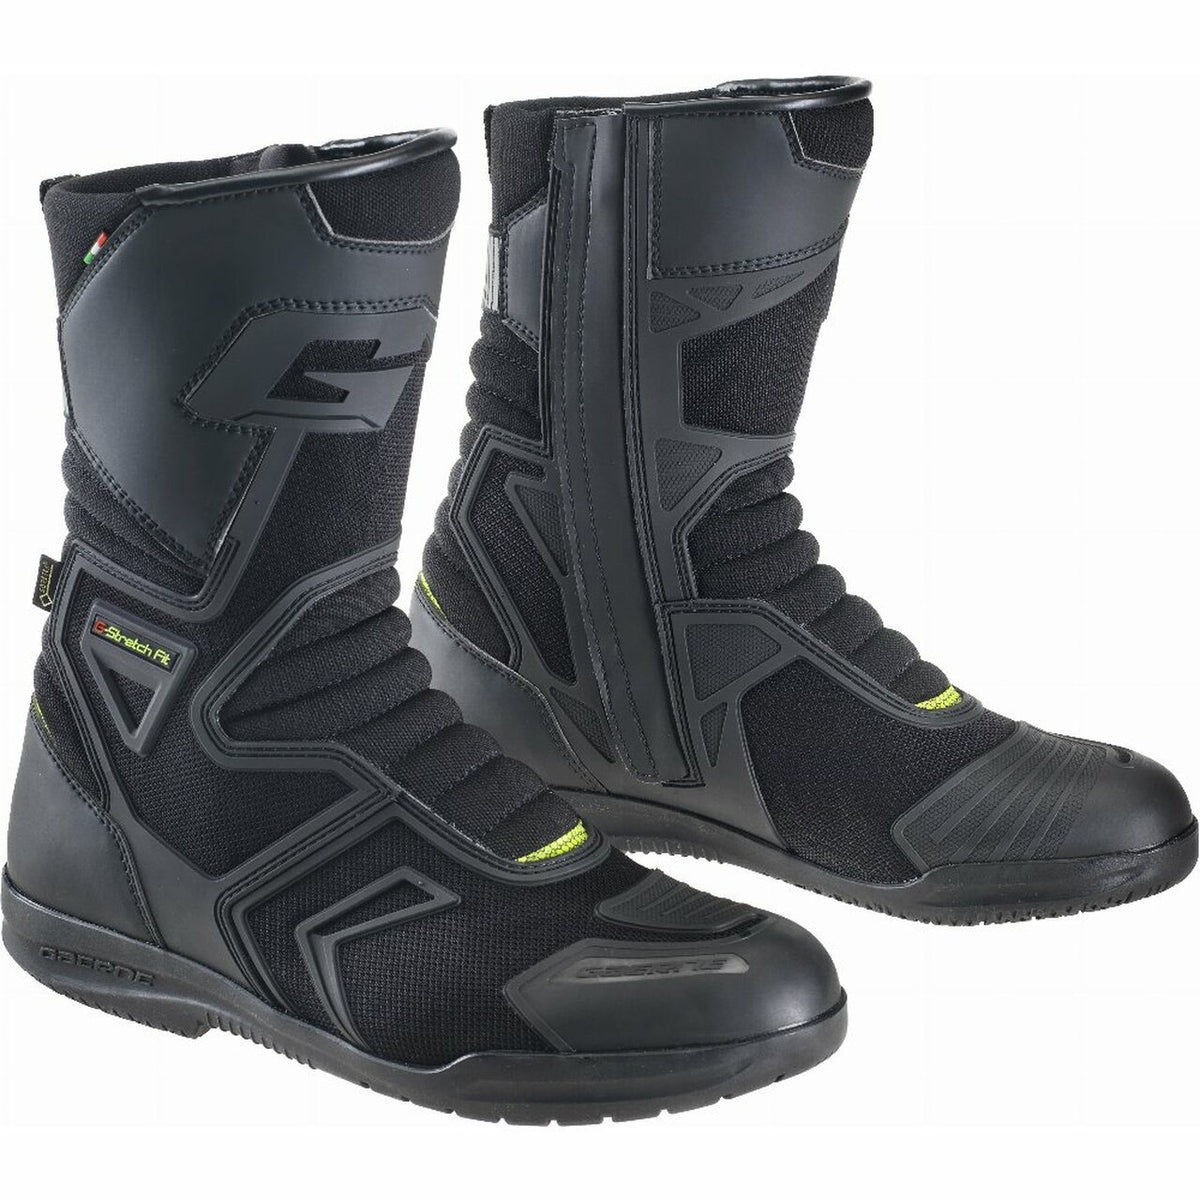 Gaerne Helium Gore-Tex Touring Boots